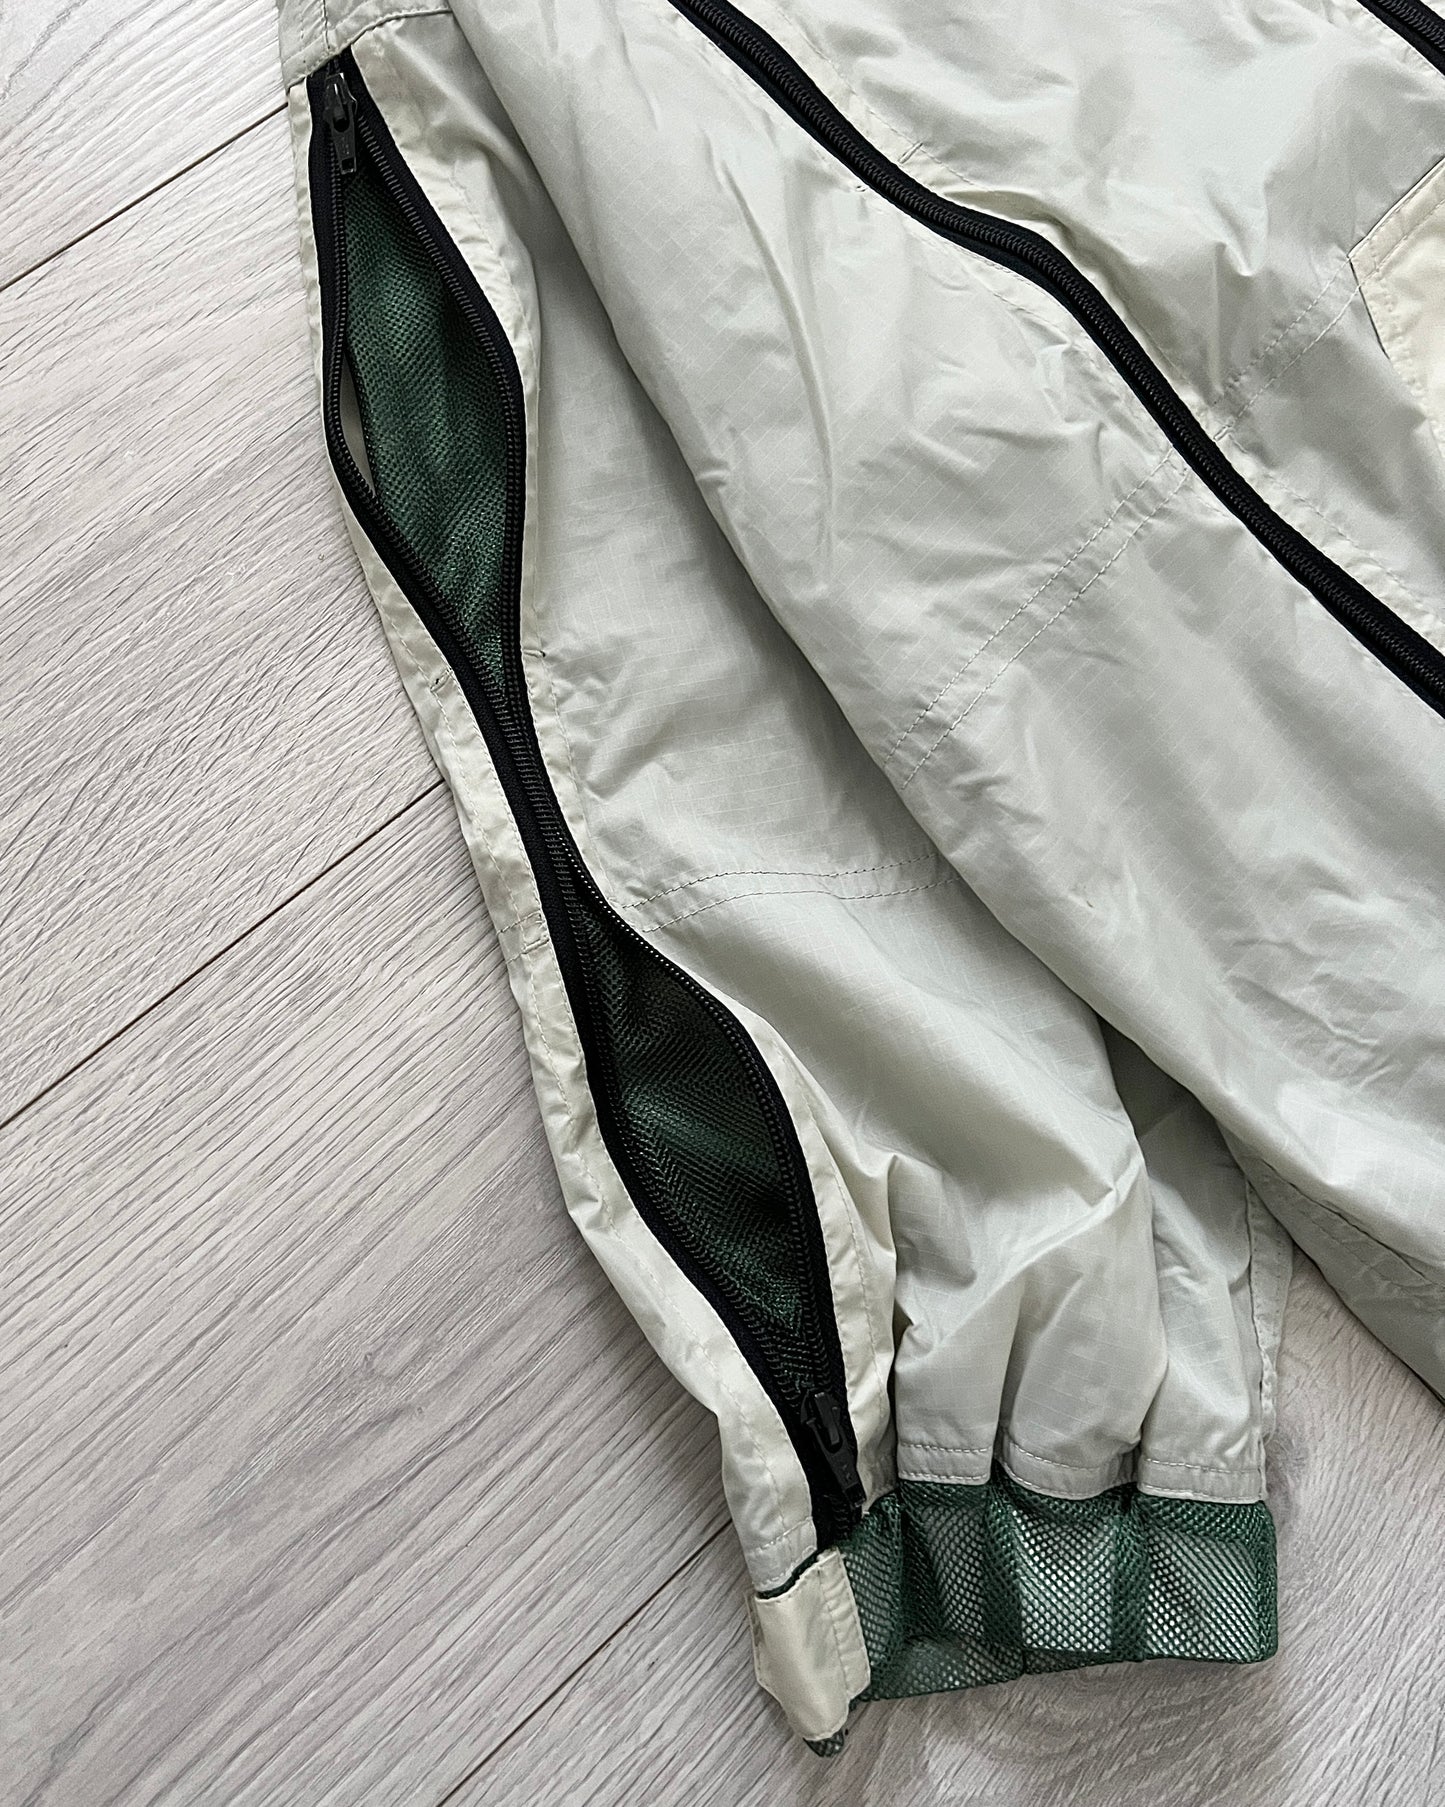 Final Home Early 00s Translucent White Green Survival Nylon Jacket - Size XL